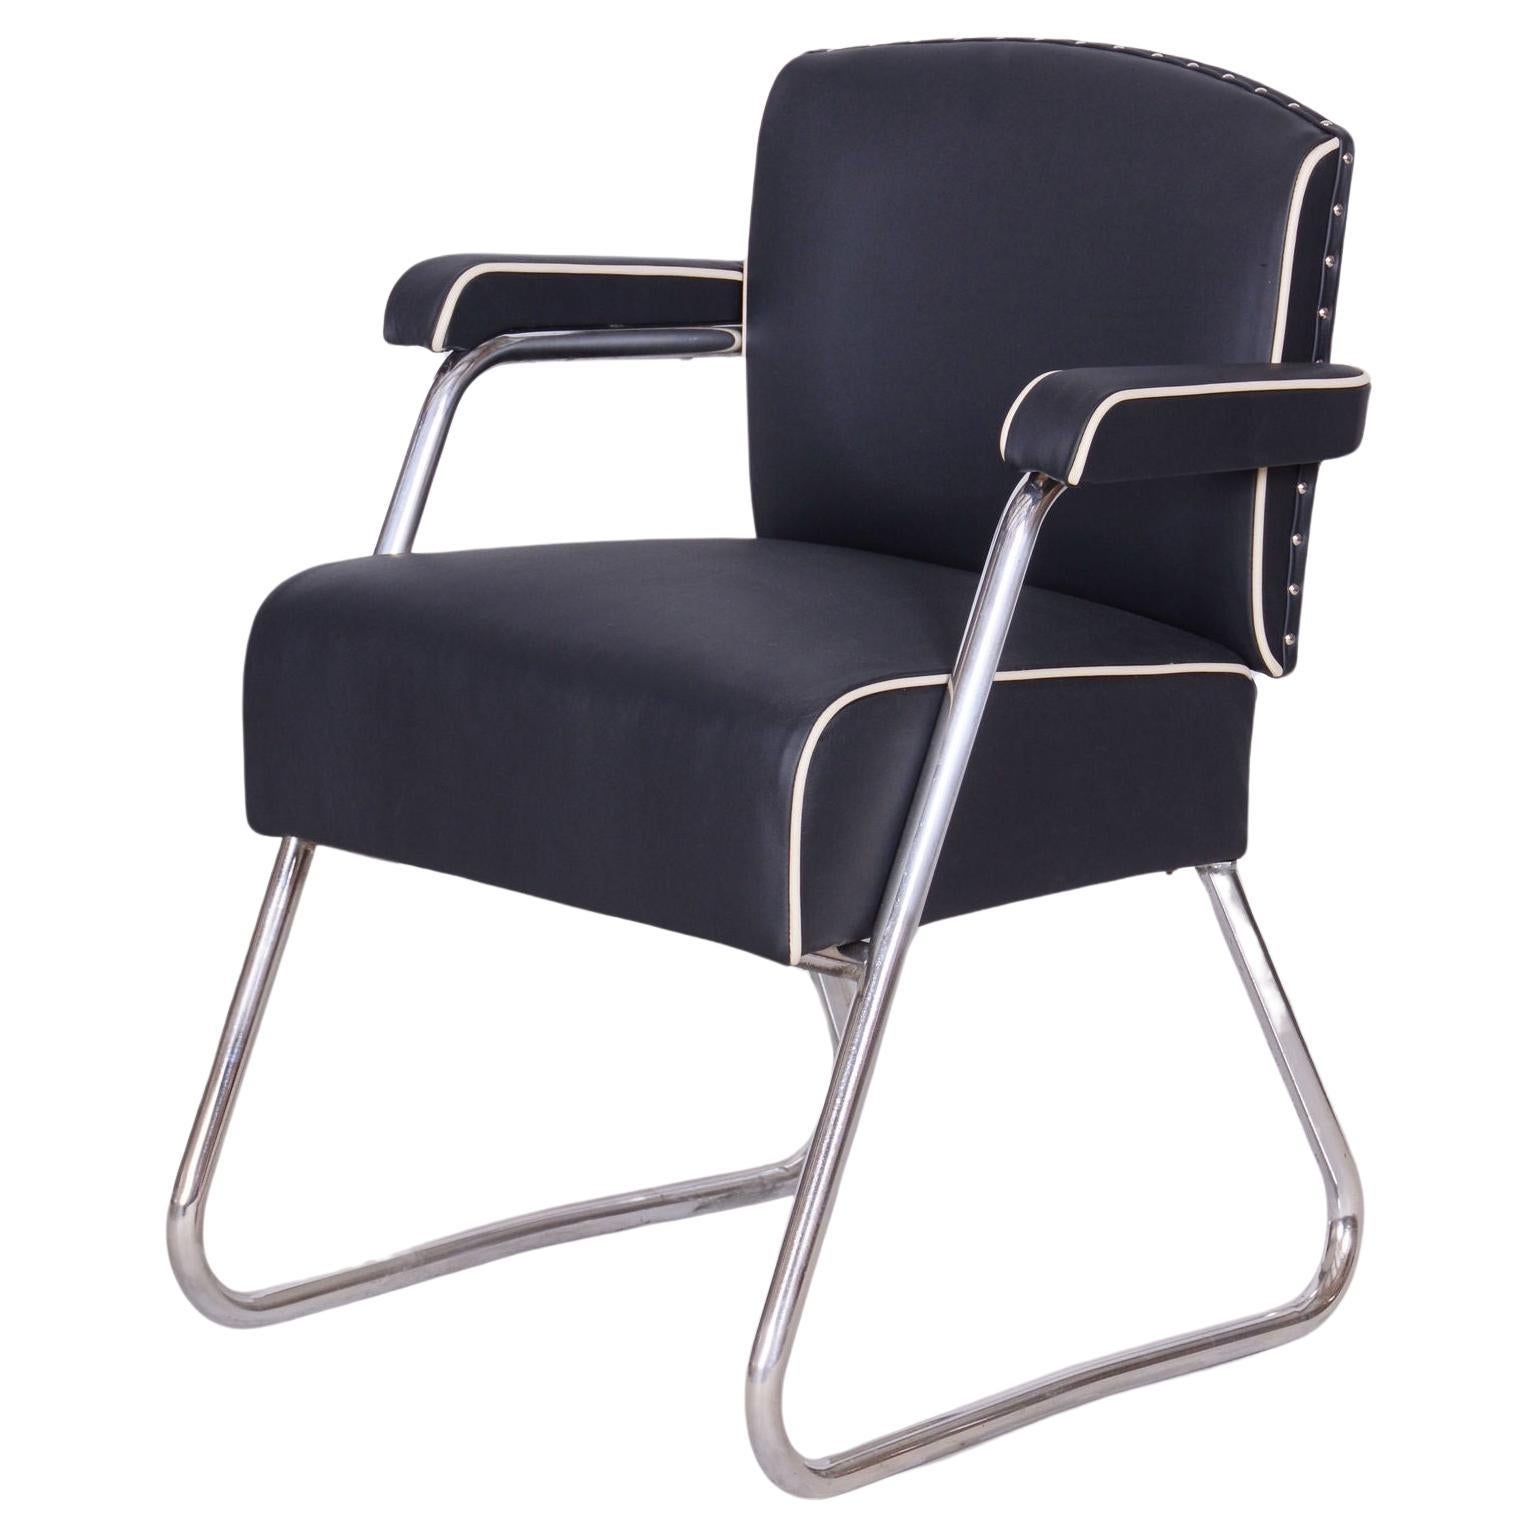 Restored Black Bauhaus Armchair, Mauser, Rohde, Chrome, Leather, Germany, 1930s For Sale